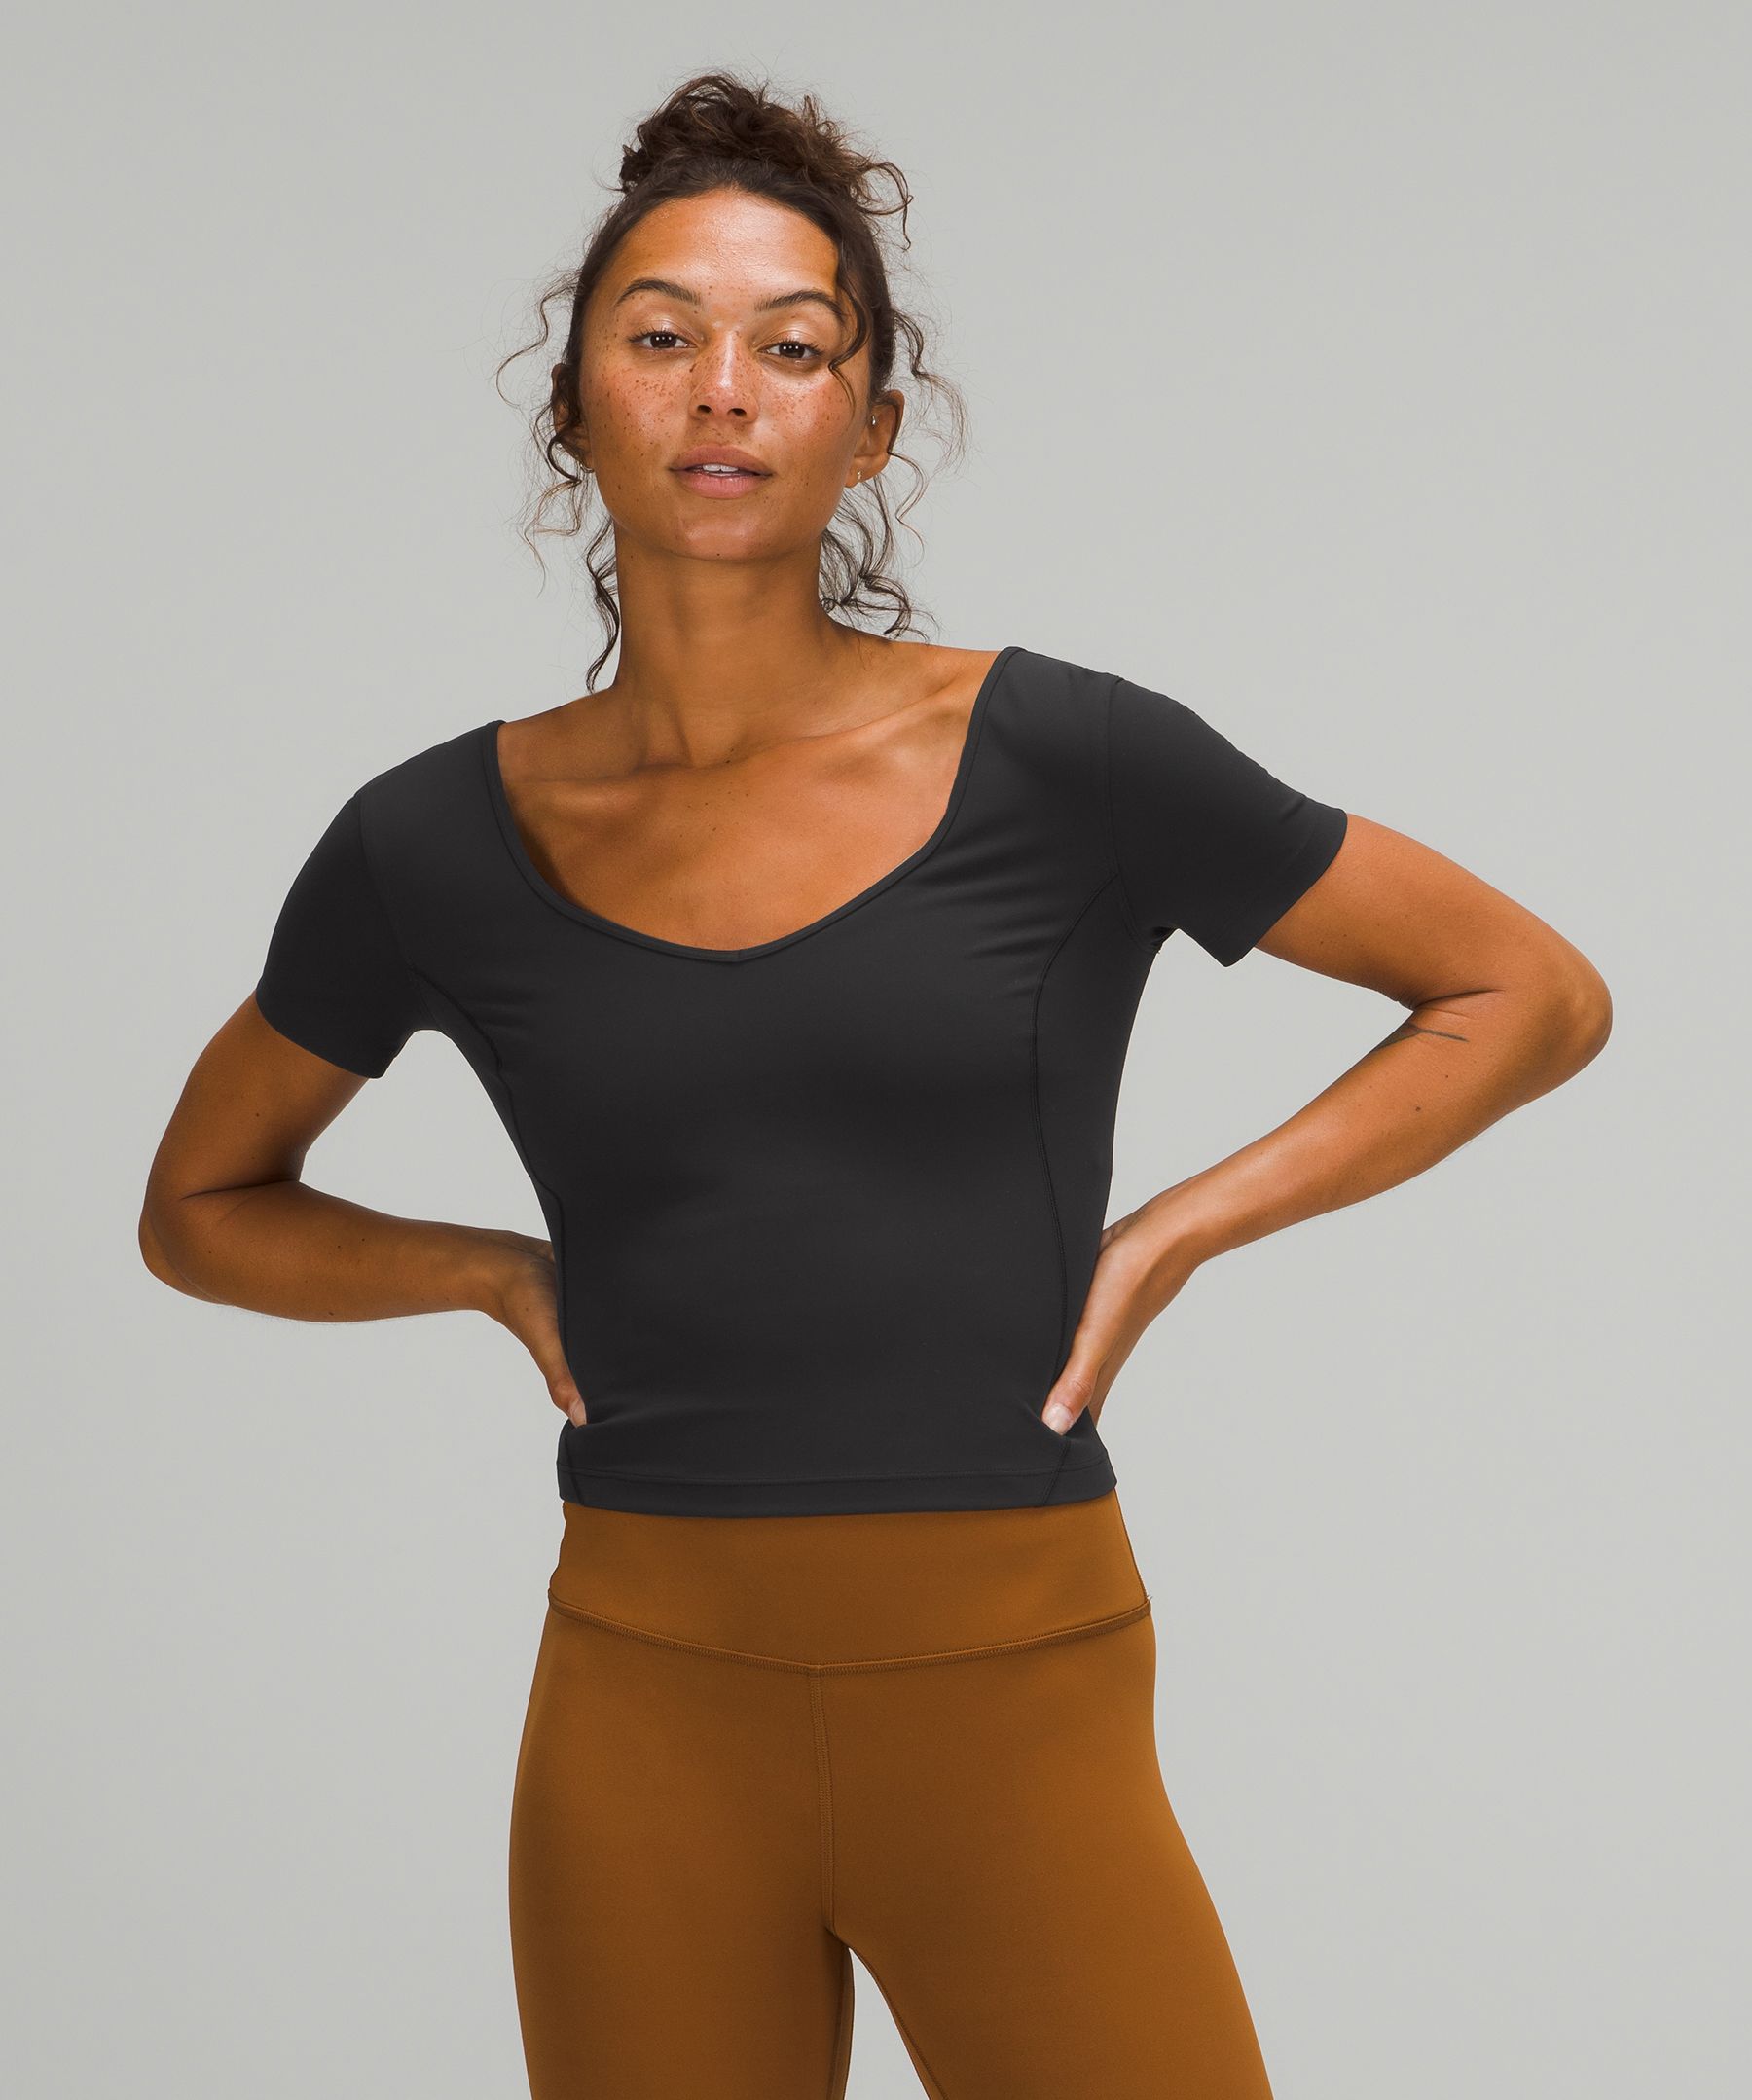 Nulu™ Cropped Slim Yoga Short Sleeve Shirt vs Align™ T-shirt: Has anybody  tried both that can comment on difference in fit and performance? : r/ lululemon